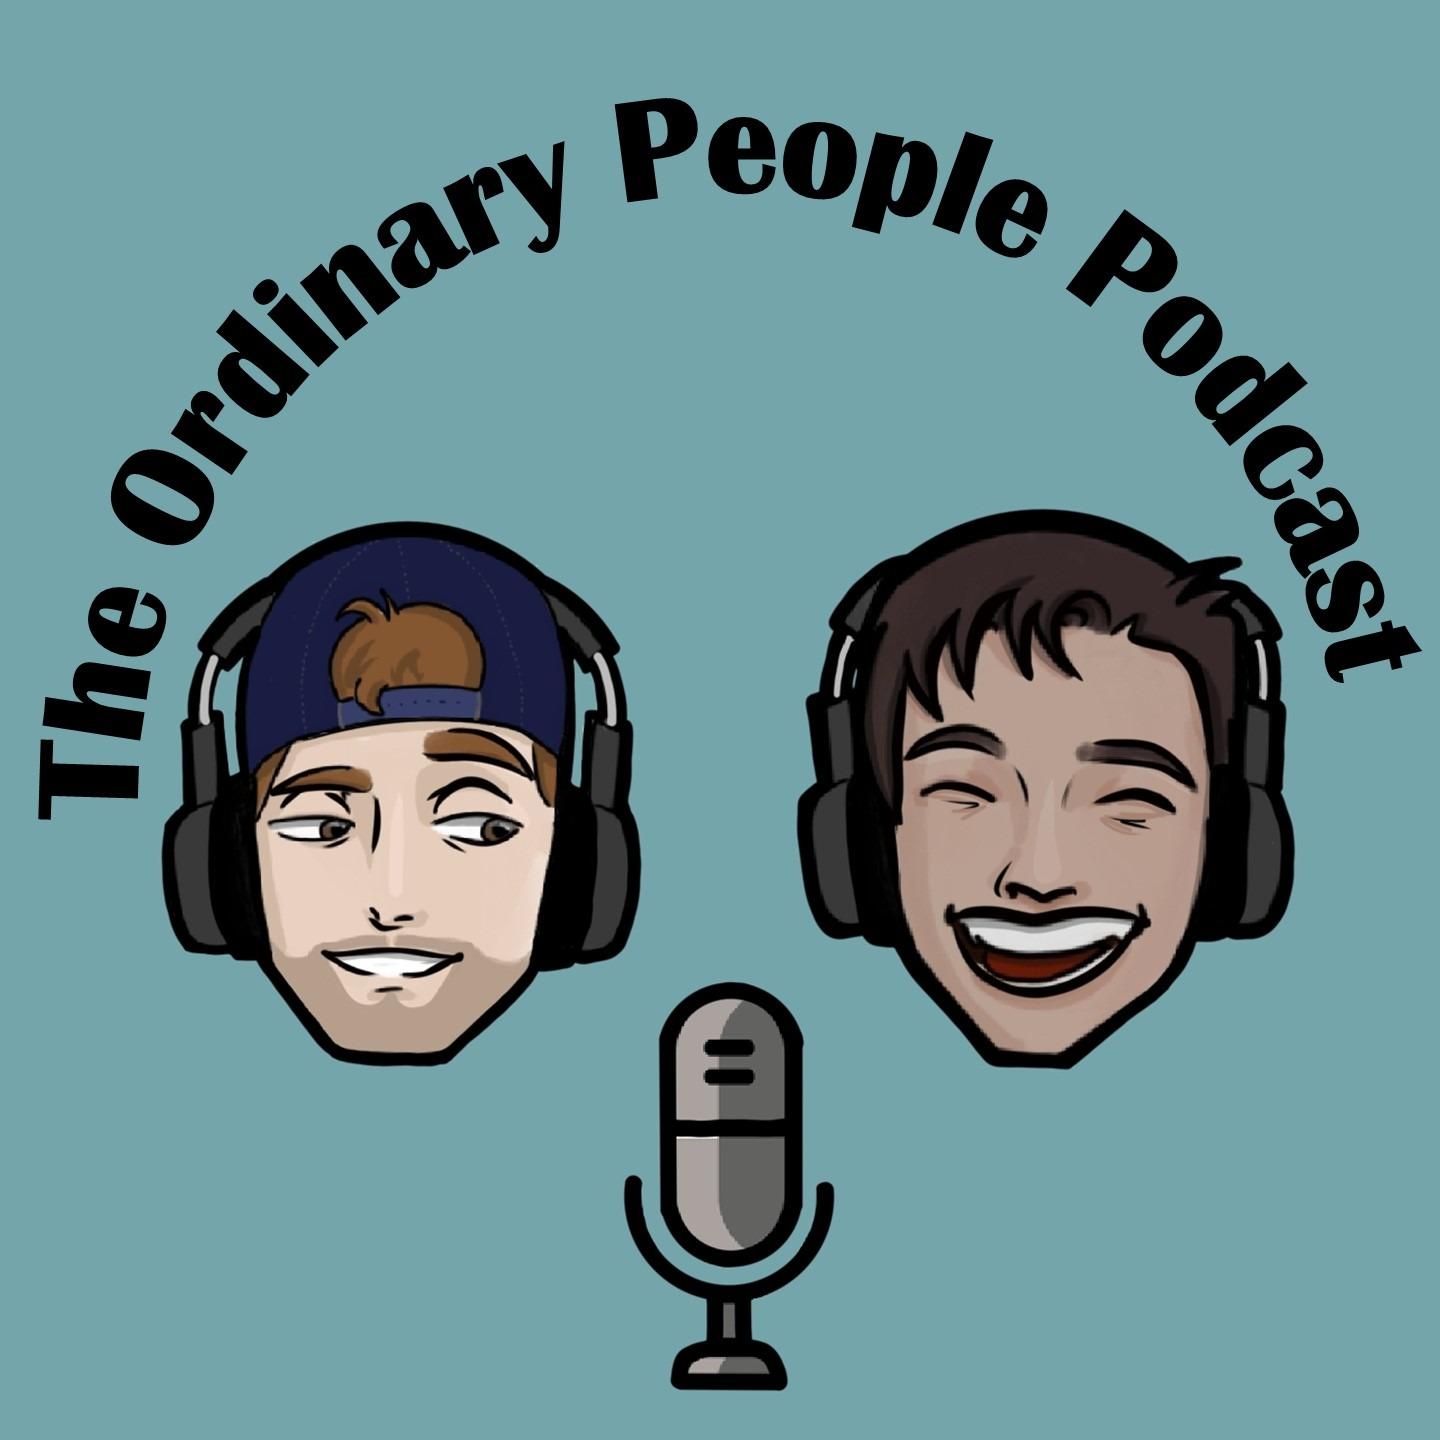 The Ordinary People Podcast